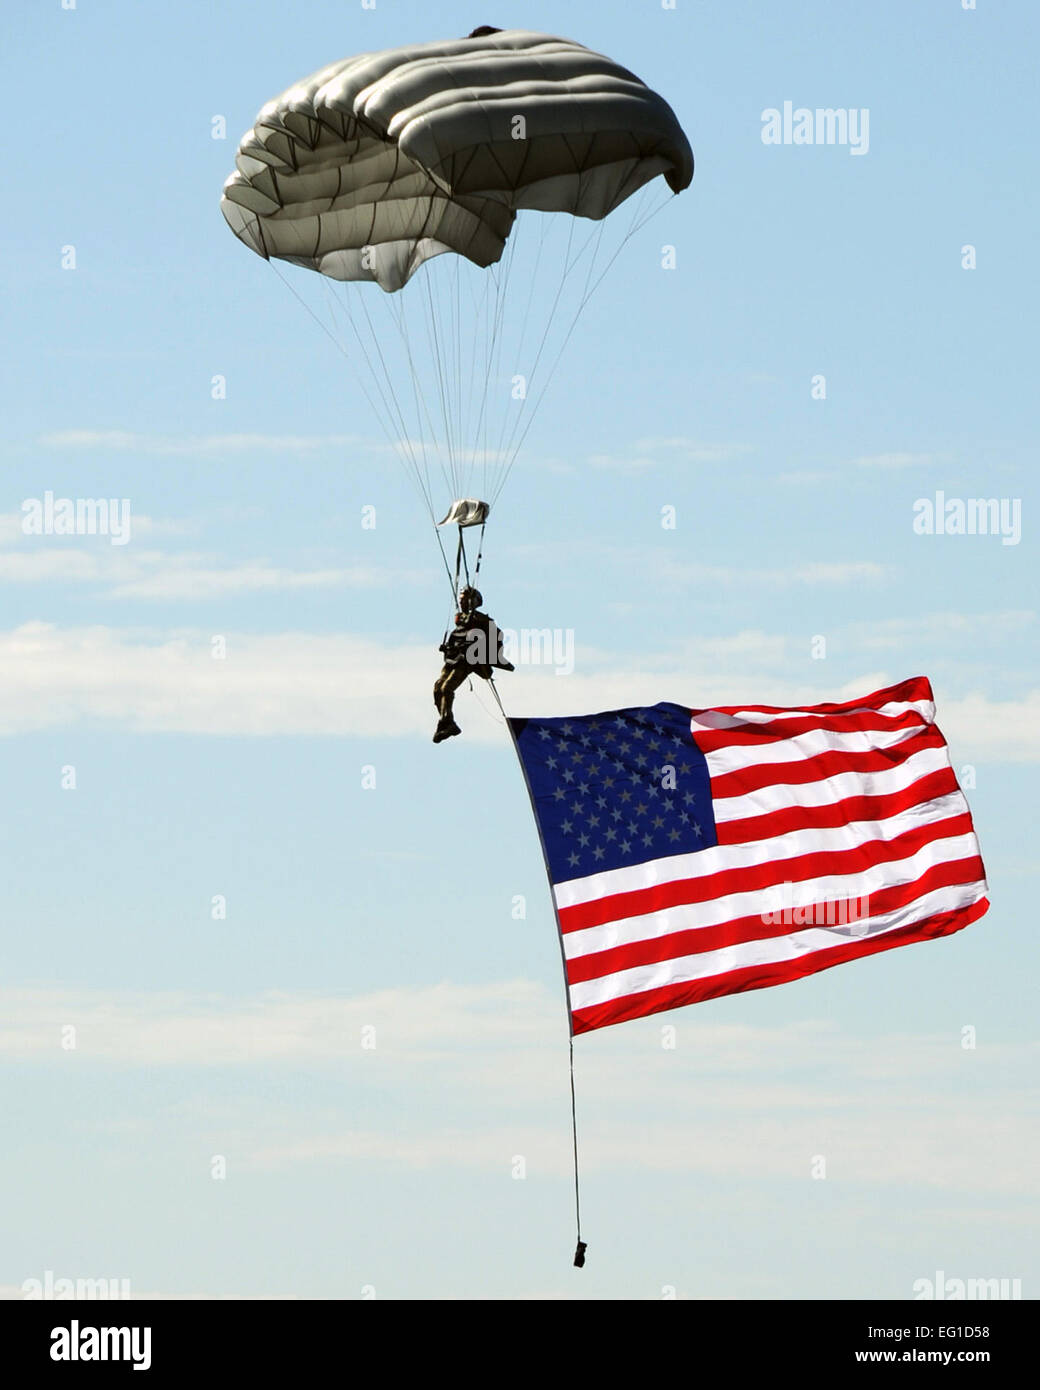 An Airman parachutes to the ground from a U.S. Air Force C-17 Globemaster III cargo aircraft while streaming an American flag July 24, 2011, at Joint Base Lewis-McChord, Wash., during the opening ceremony of the 2011 Air Mobility Rodeo. The Air Mobility Rodeo is the Air Force's premier international combat skills and flying operations competition designed to develop and improve techniques, procedures, and interoperability, while optimizing international mobility partnerships, and enhancing mobility operations.  Airman 1st Class Kenneth W. Norman Stock Photo